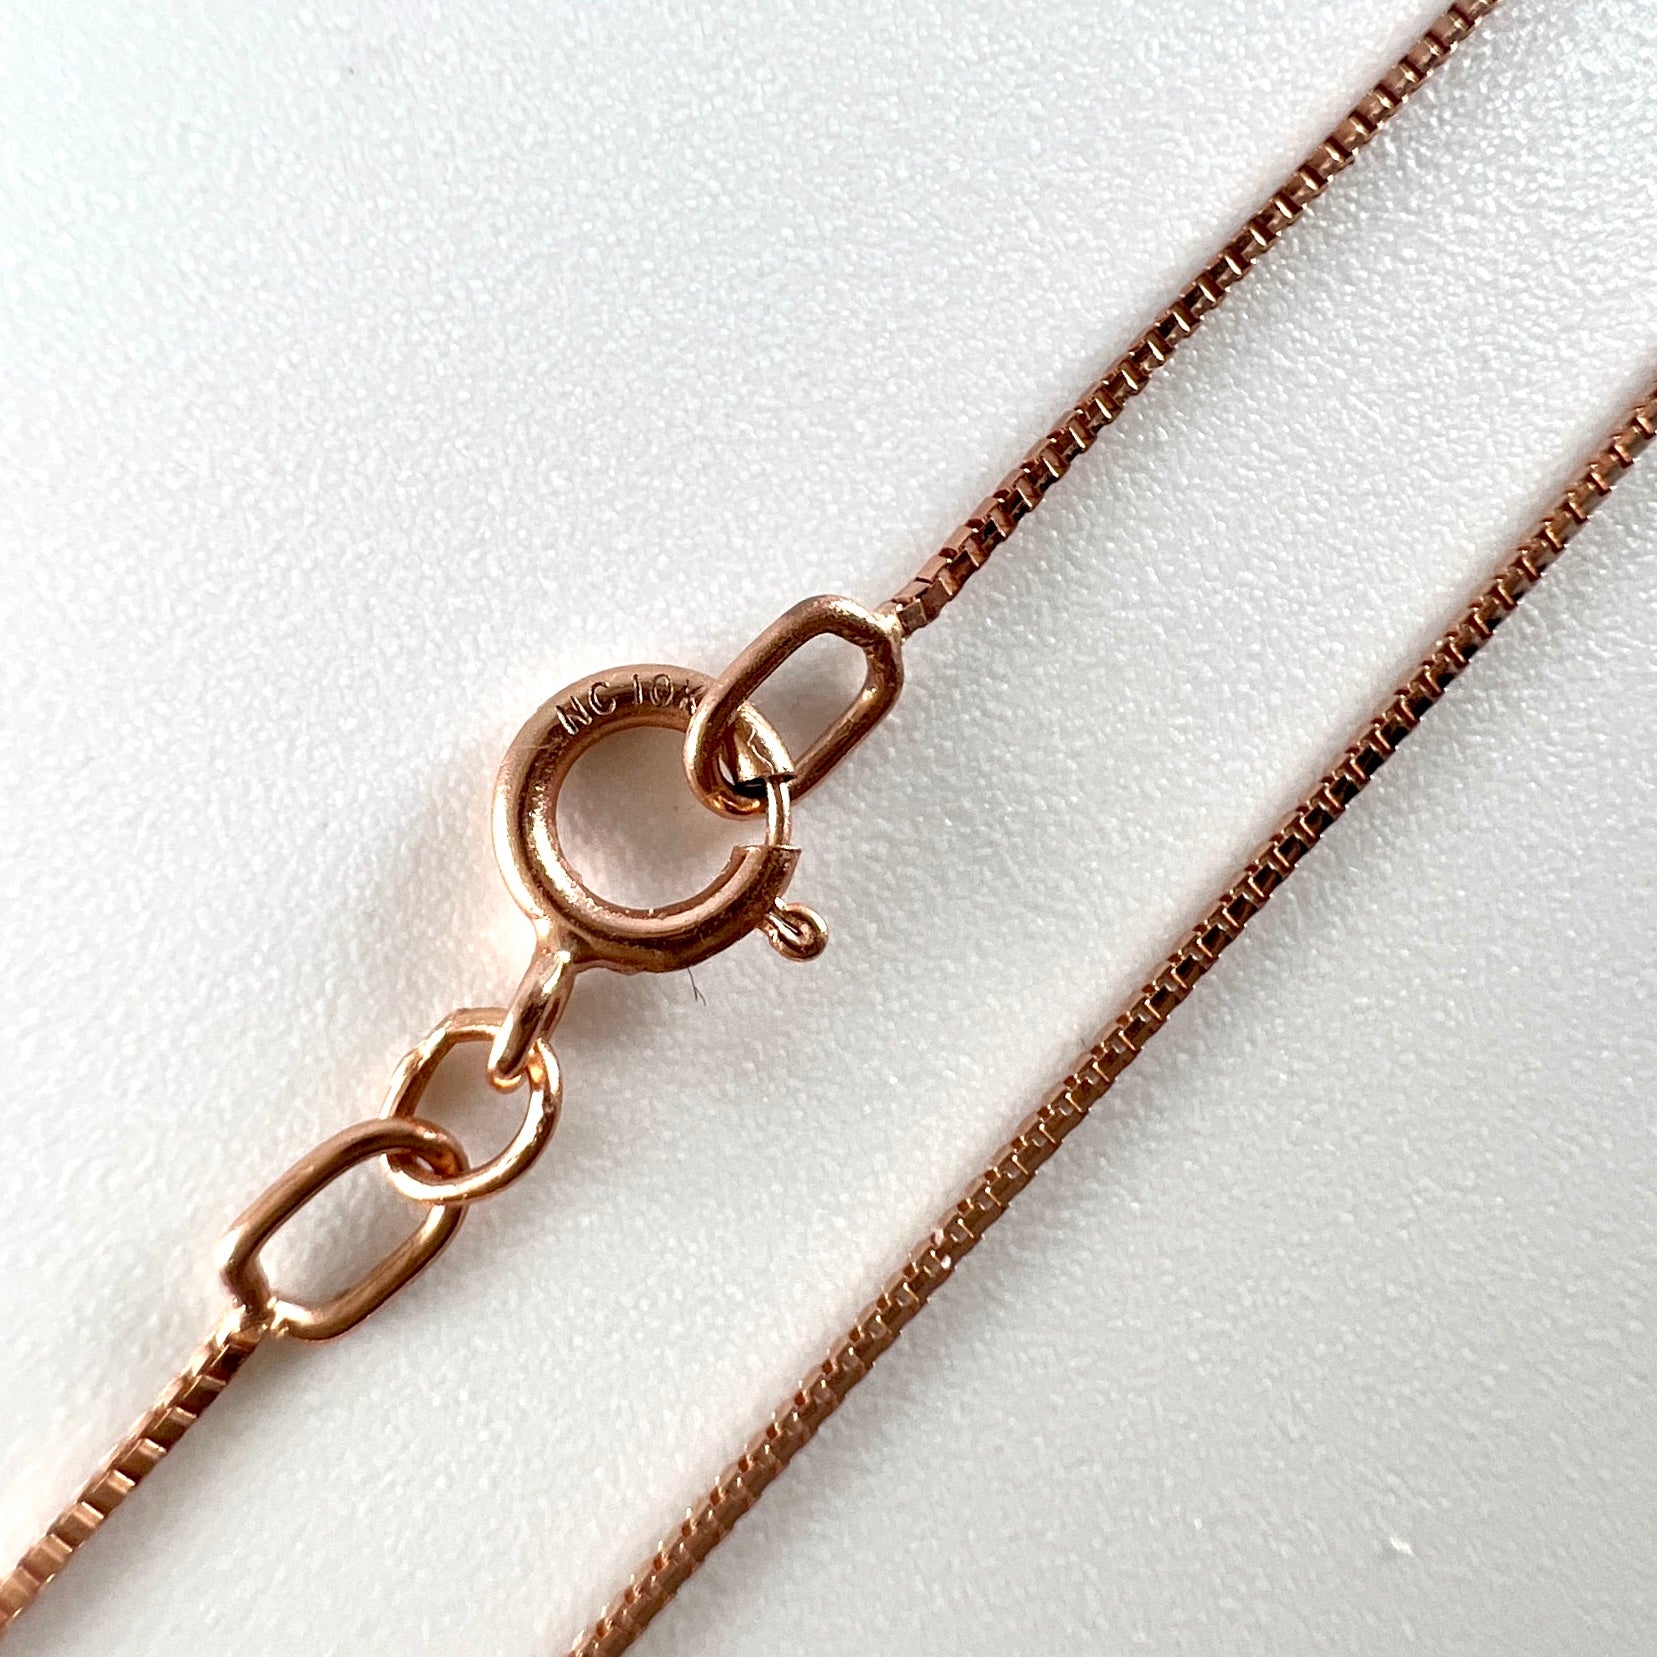 10K Rose Gold 16" Box Link Chain Necklace